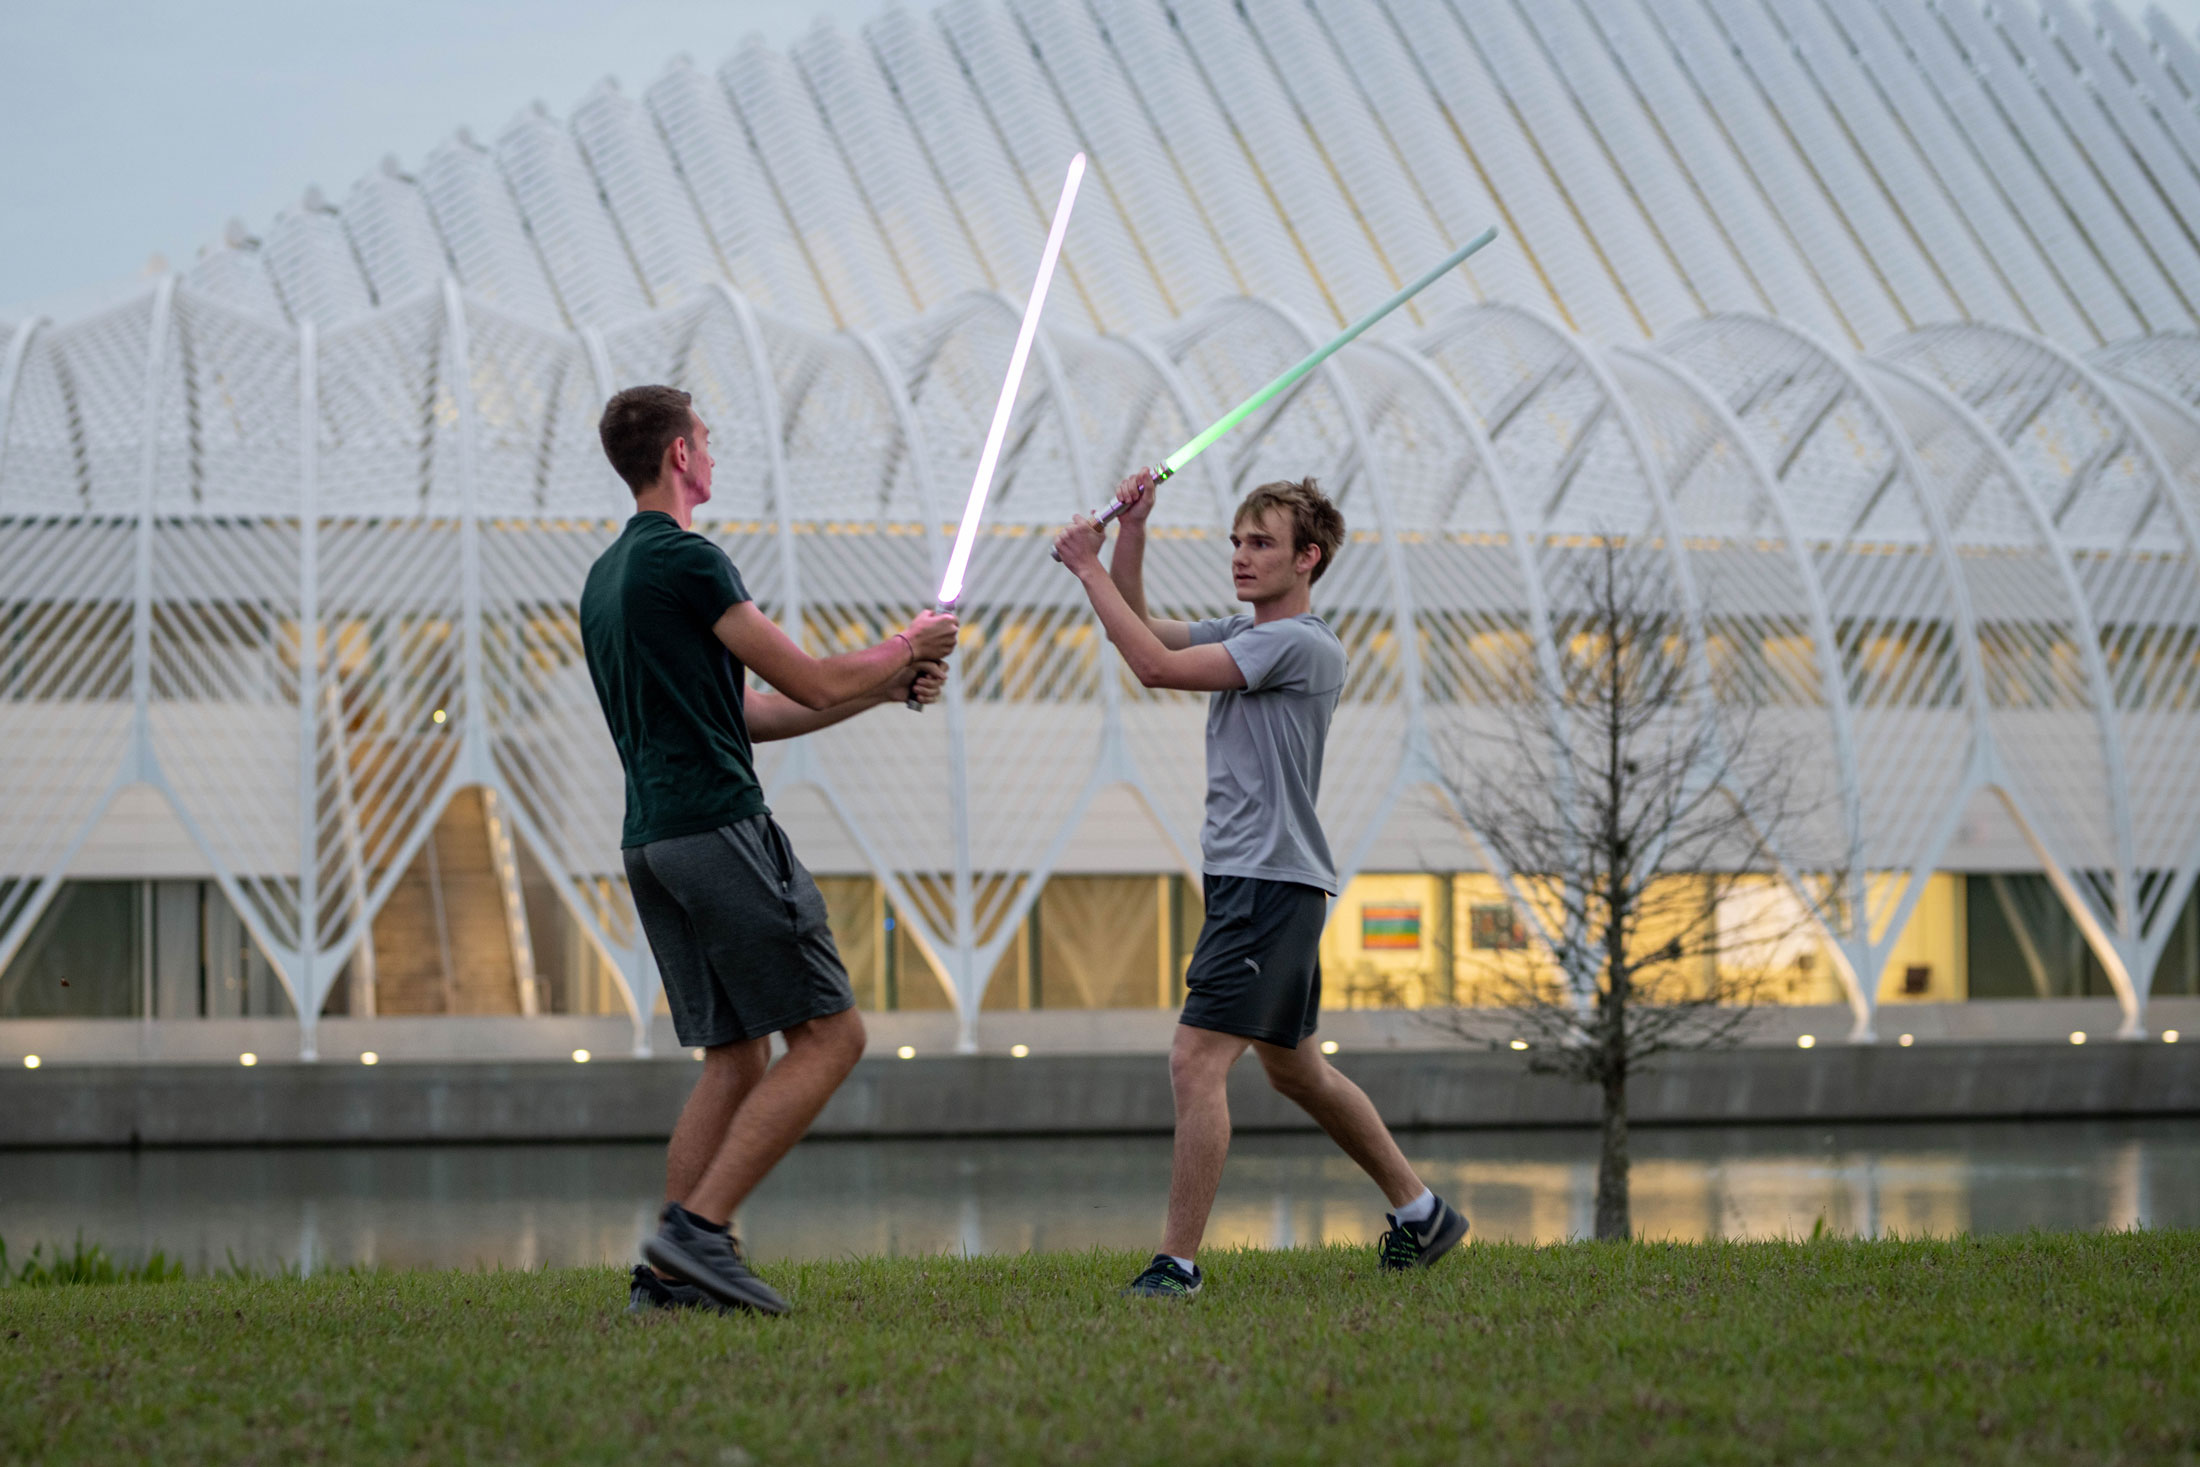 The Force guides Florida Poly students inspired by the Jedi way